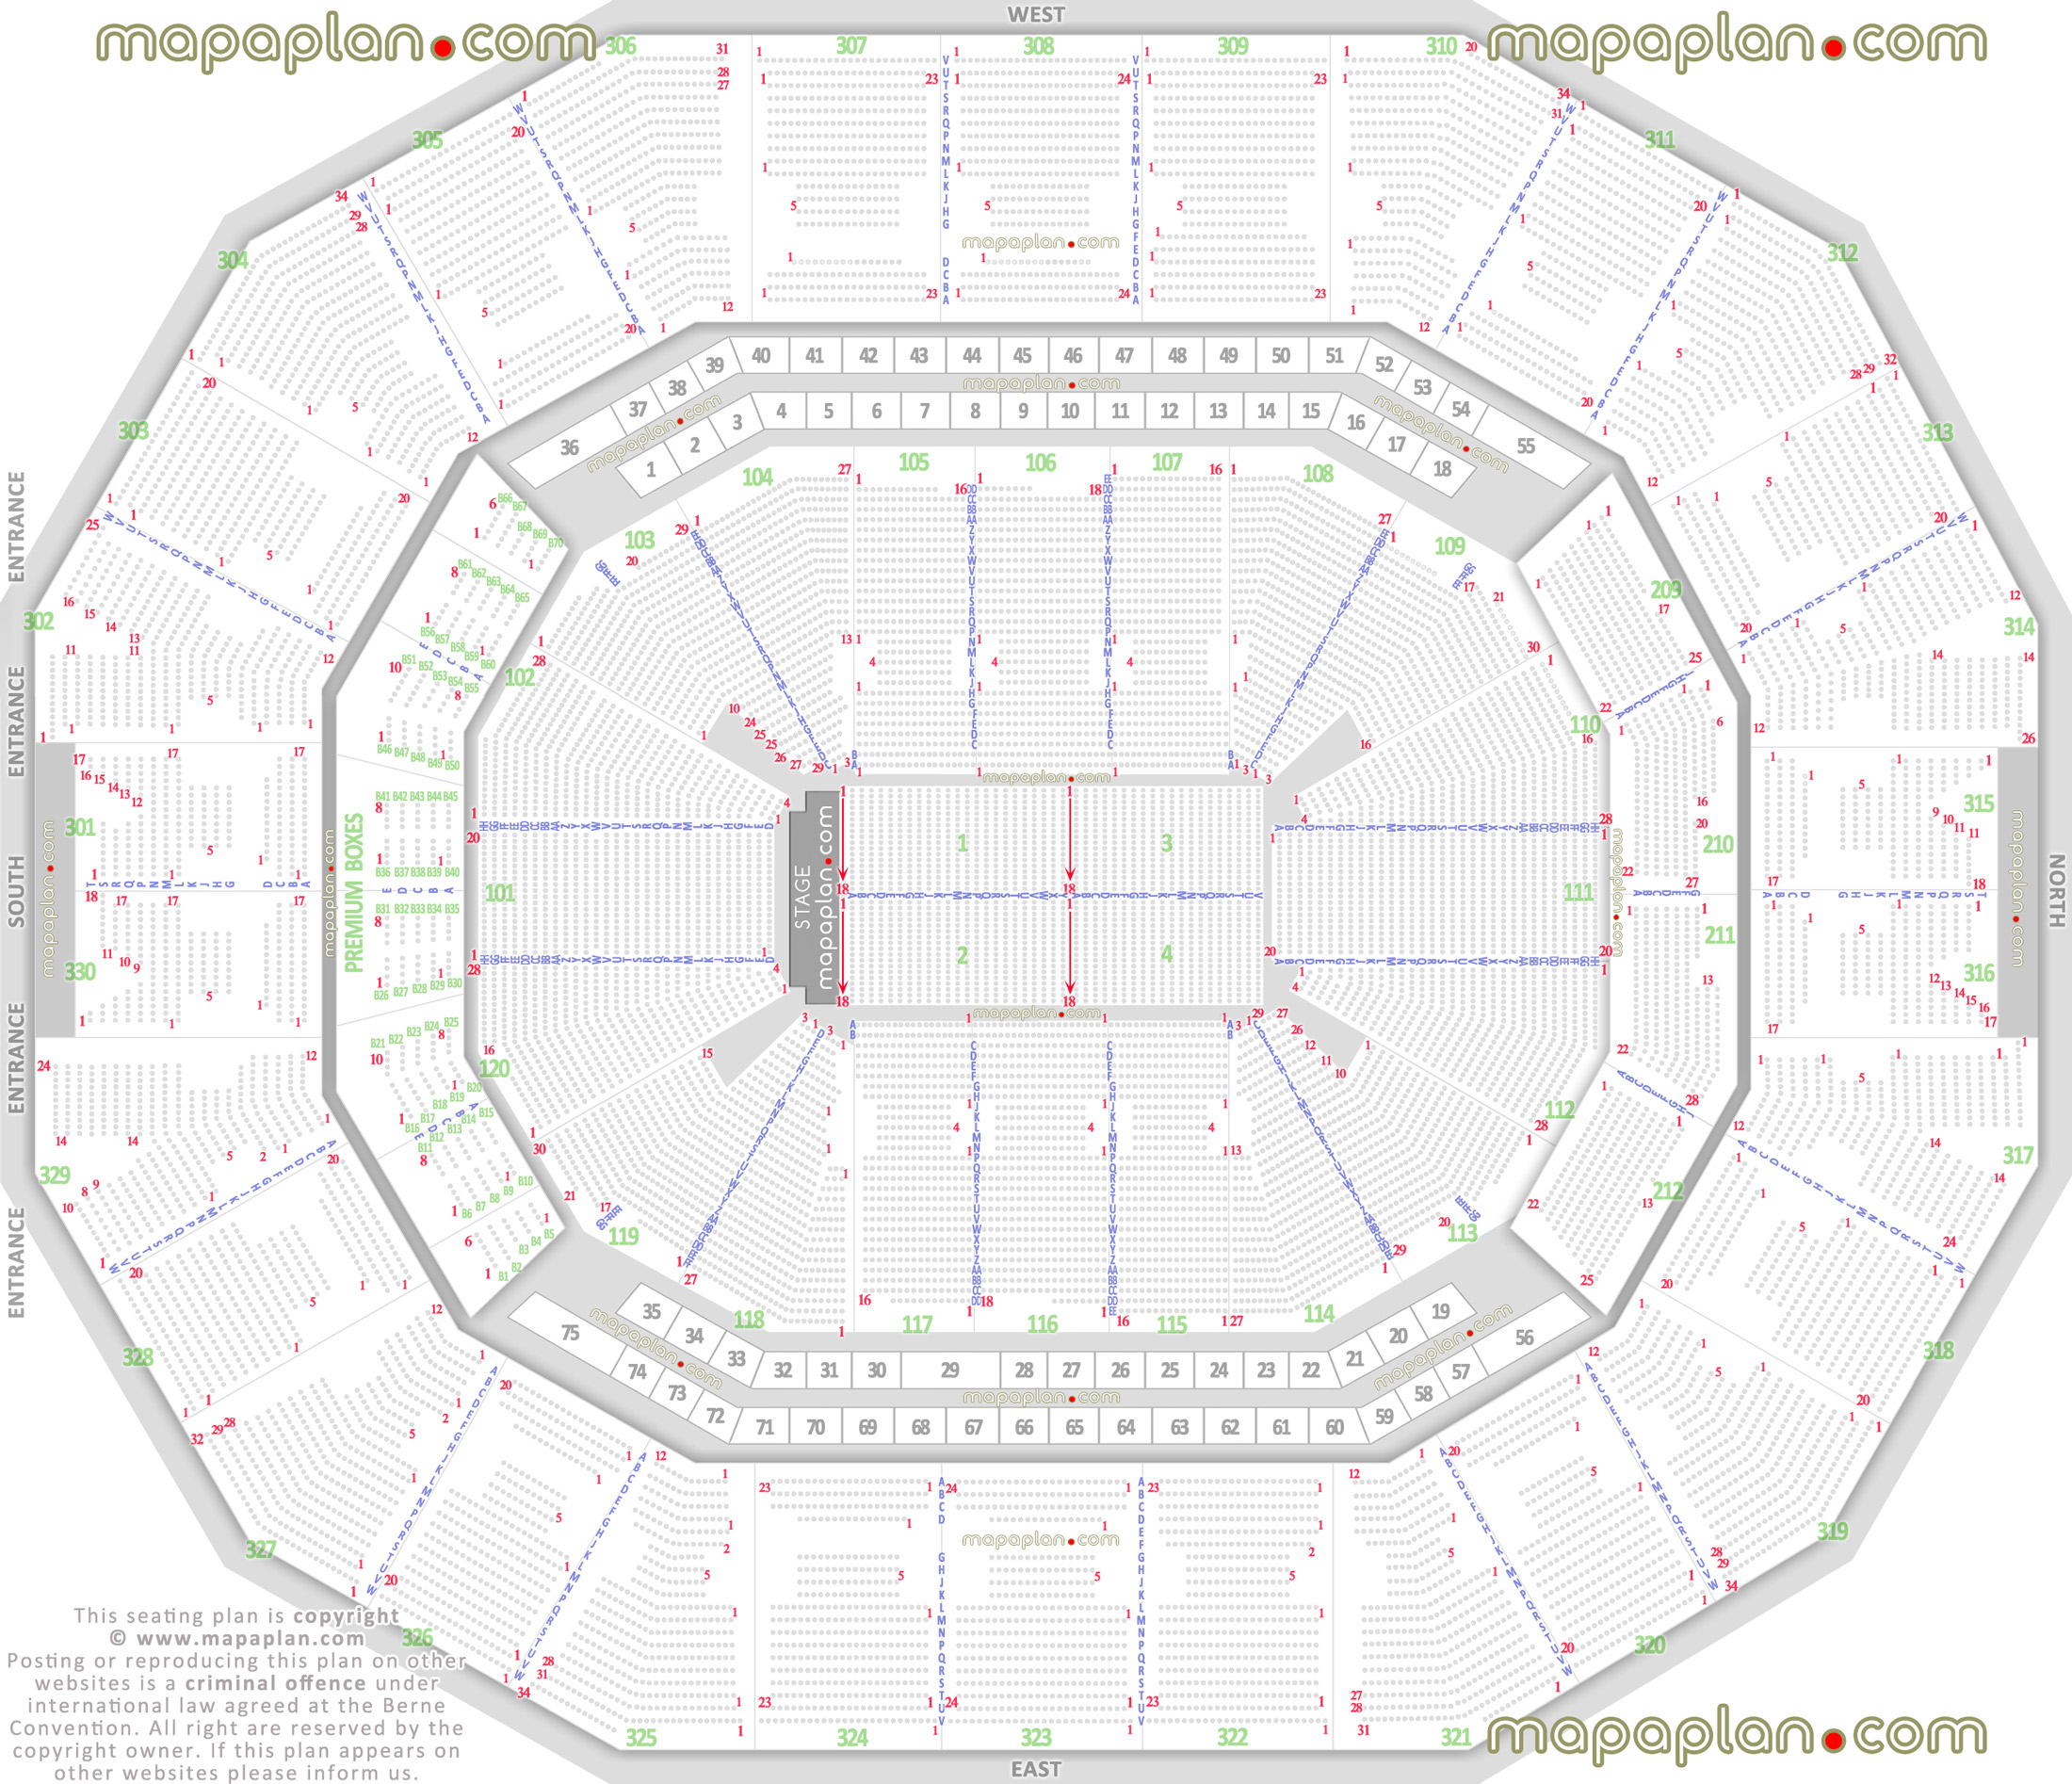 detailed seat row numbers end stage concert sections floor plan map arena lower upper level layout Louisville KFC Yum! Center seating chart